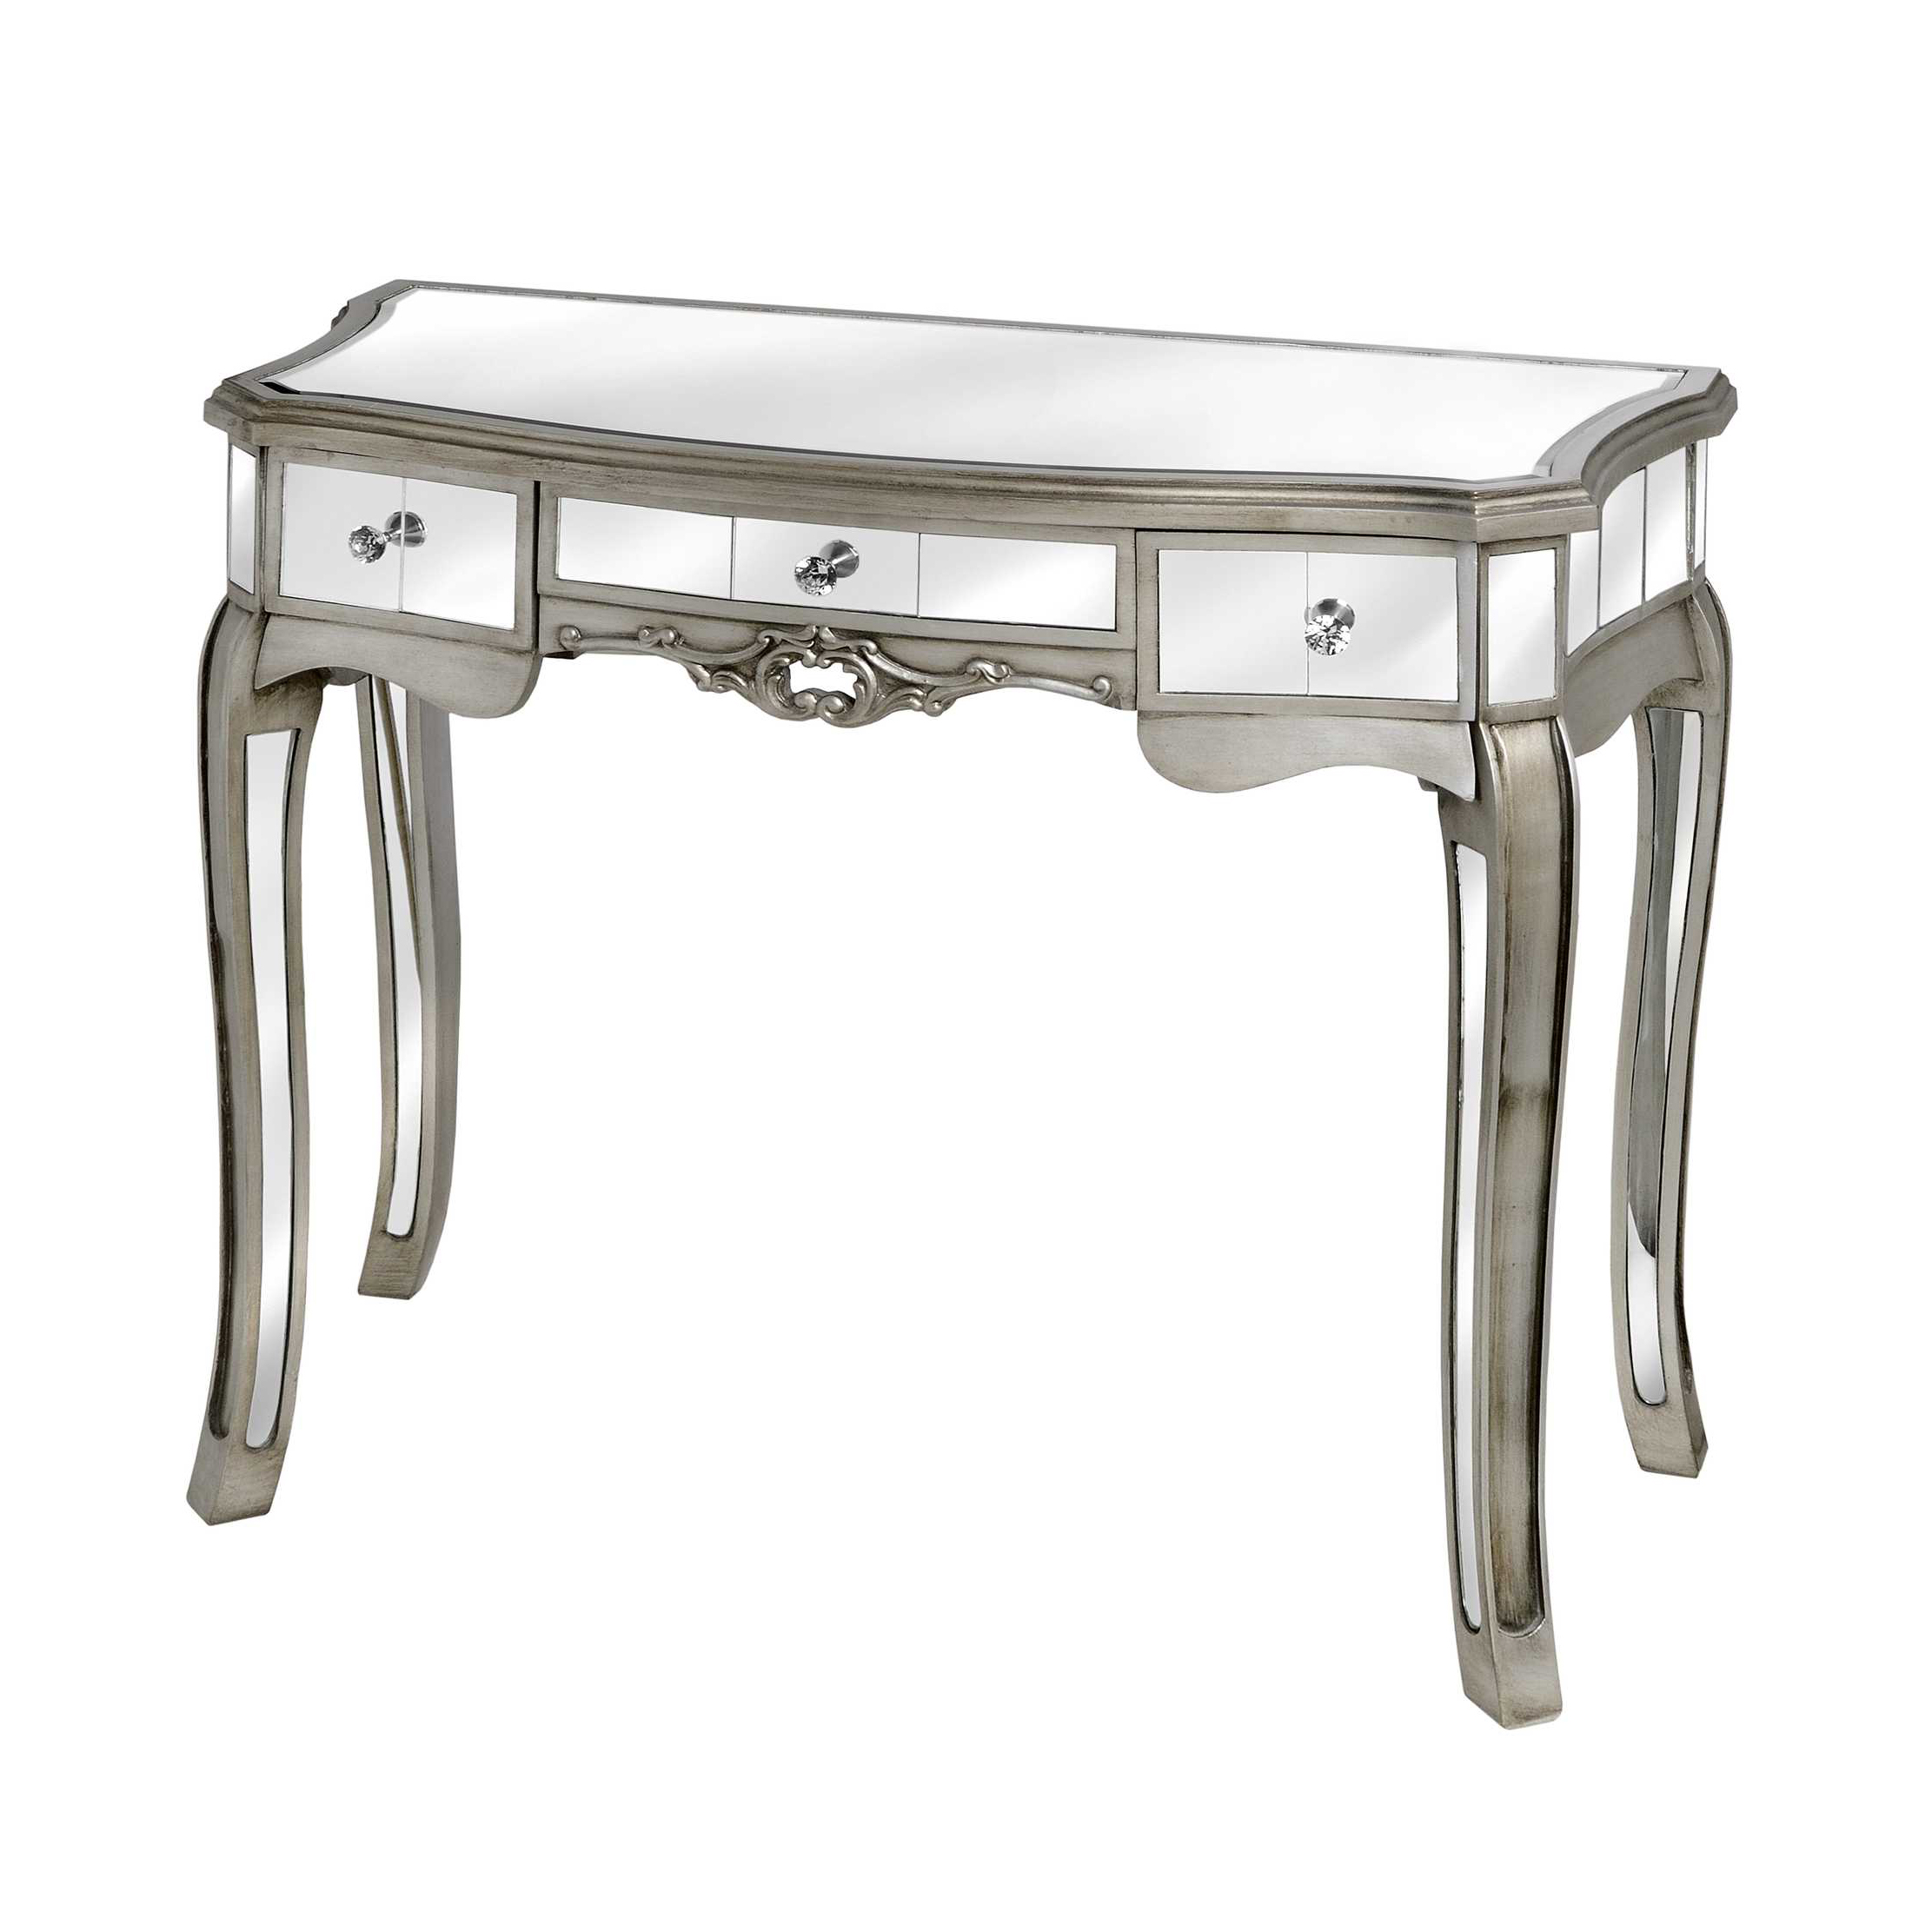 Mirrored glass make up table dressing table